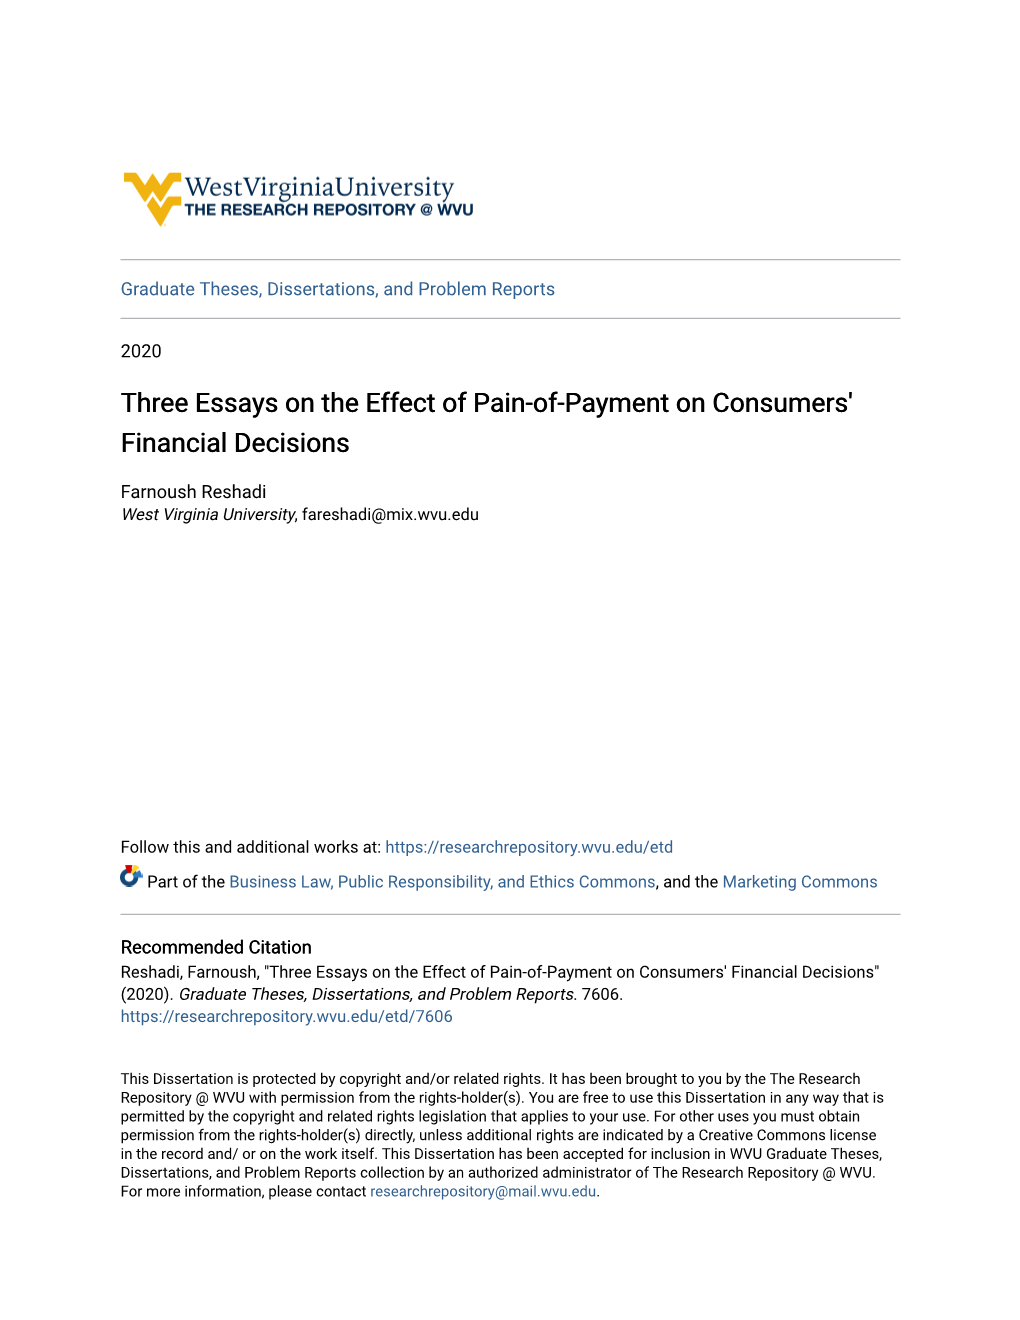 Three Essays on the Effect of Pain-Of-Payment on Consumers' Financial Decisions